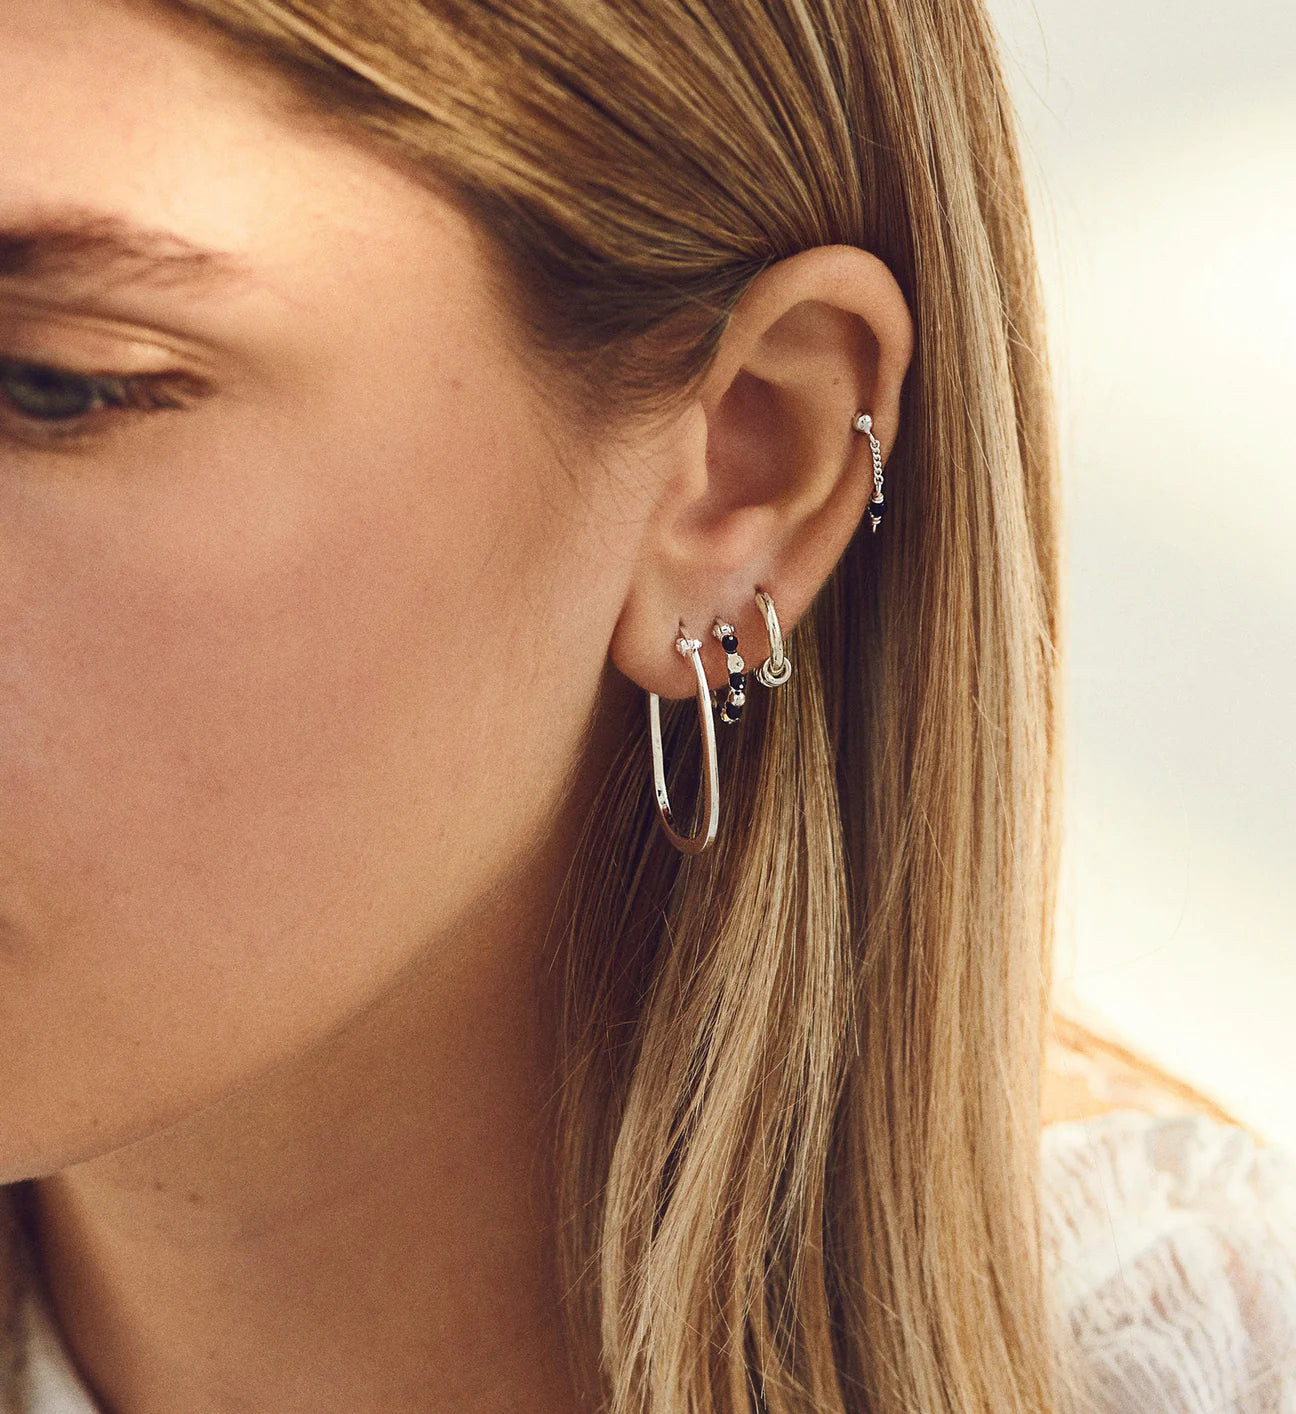 A woman wearing a pair of Anna + Nina's Link Hoop Earring - Silver, made from silver materials.